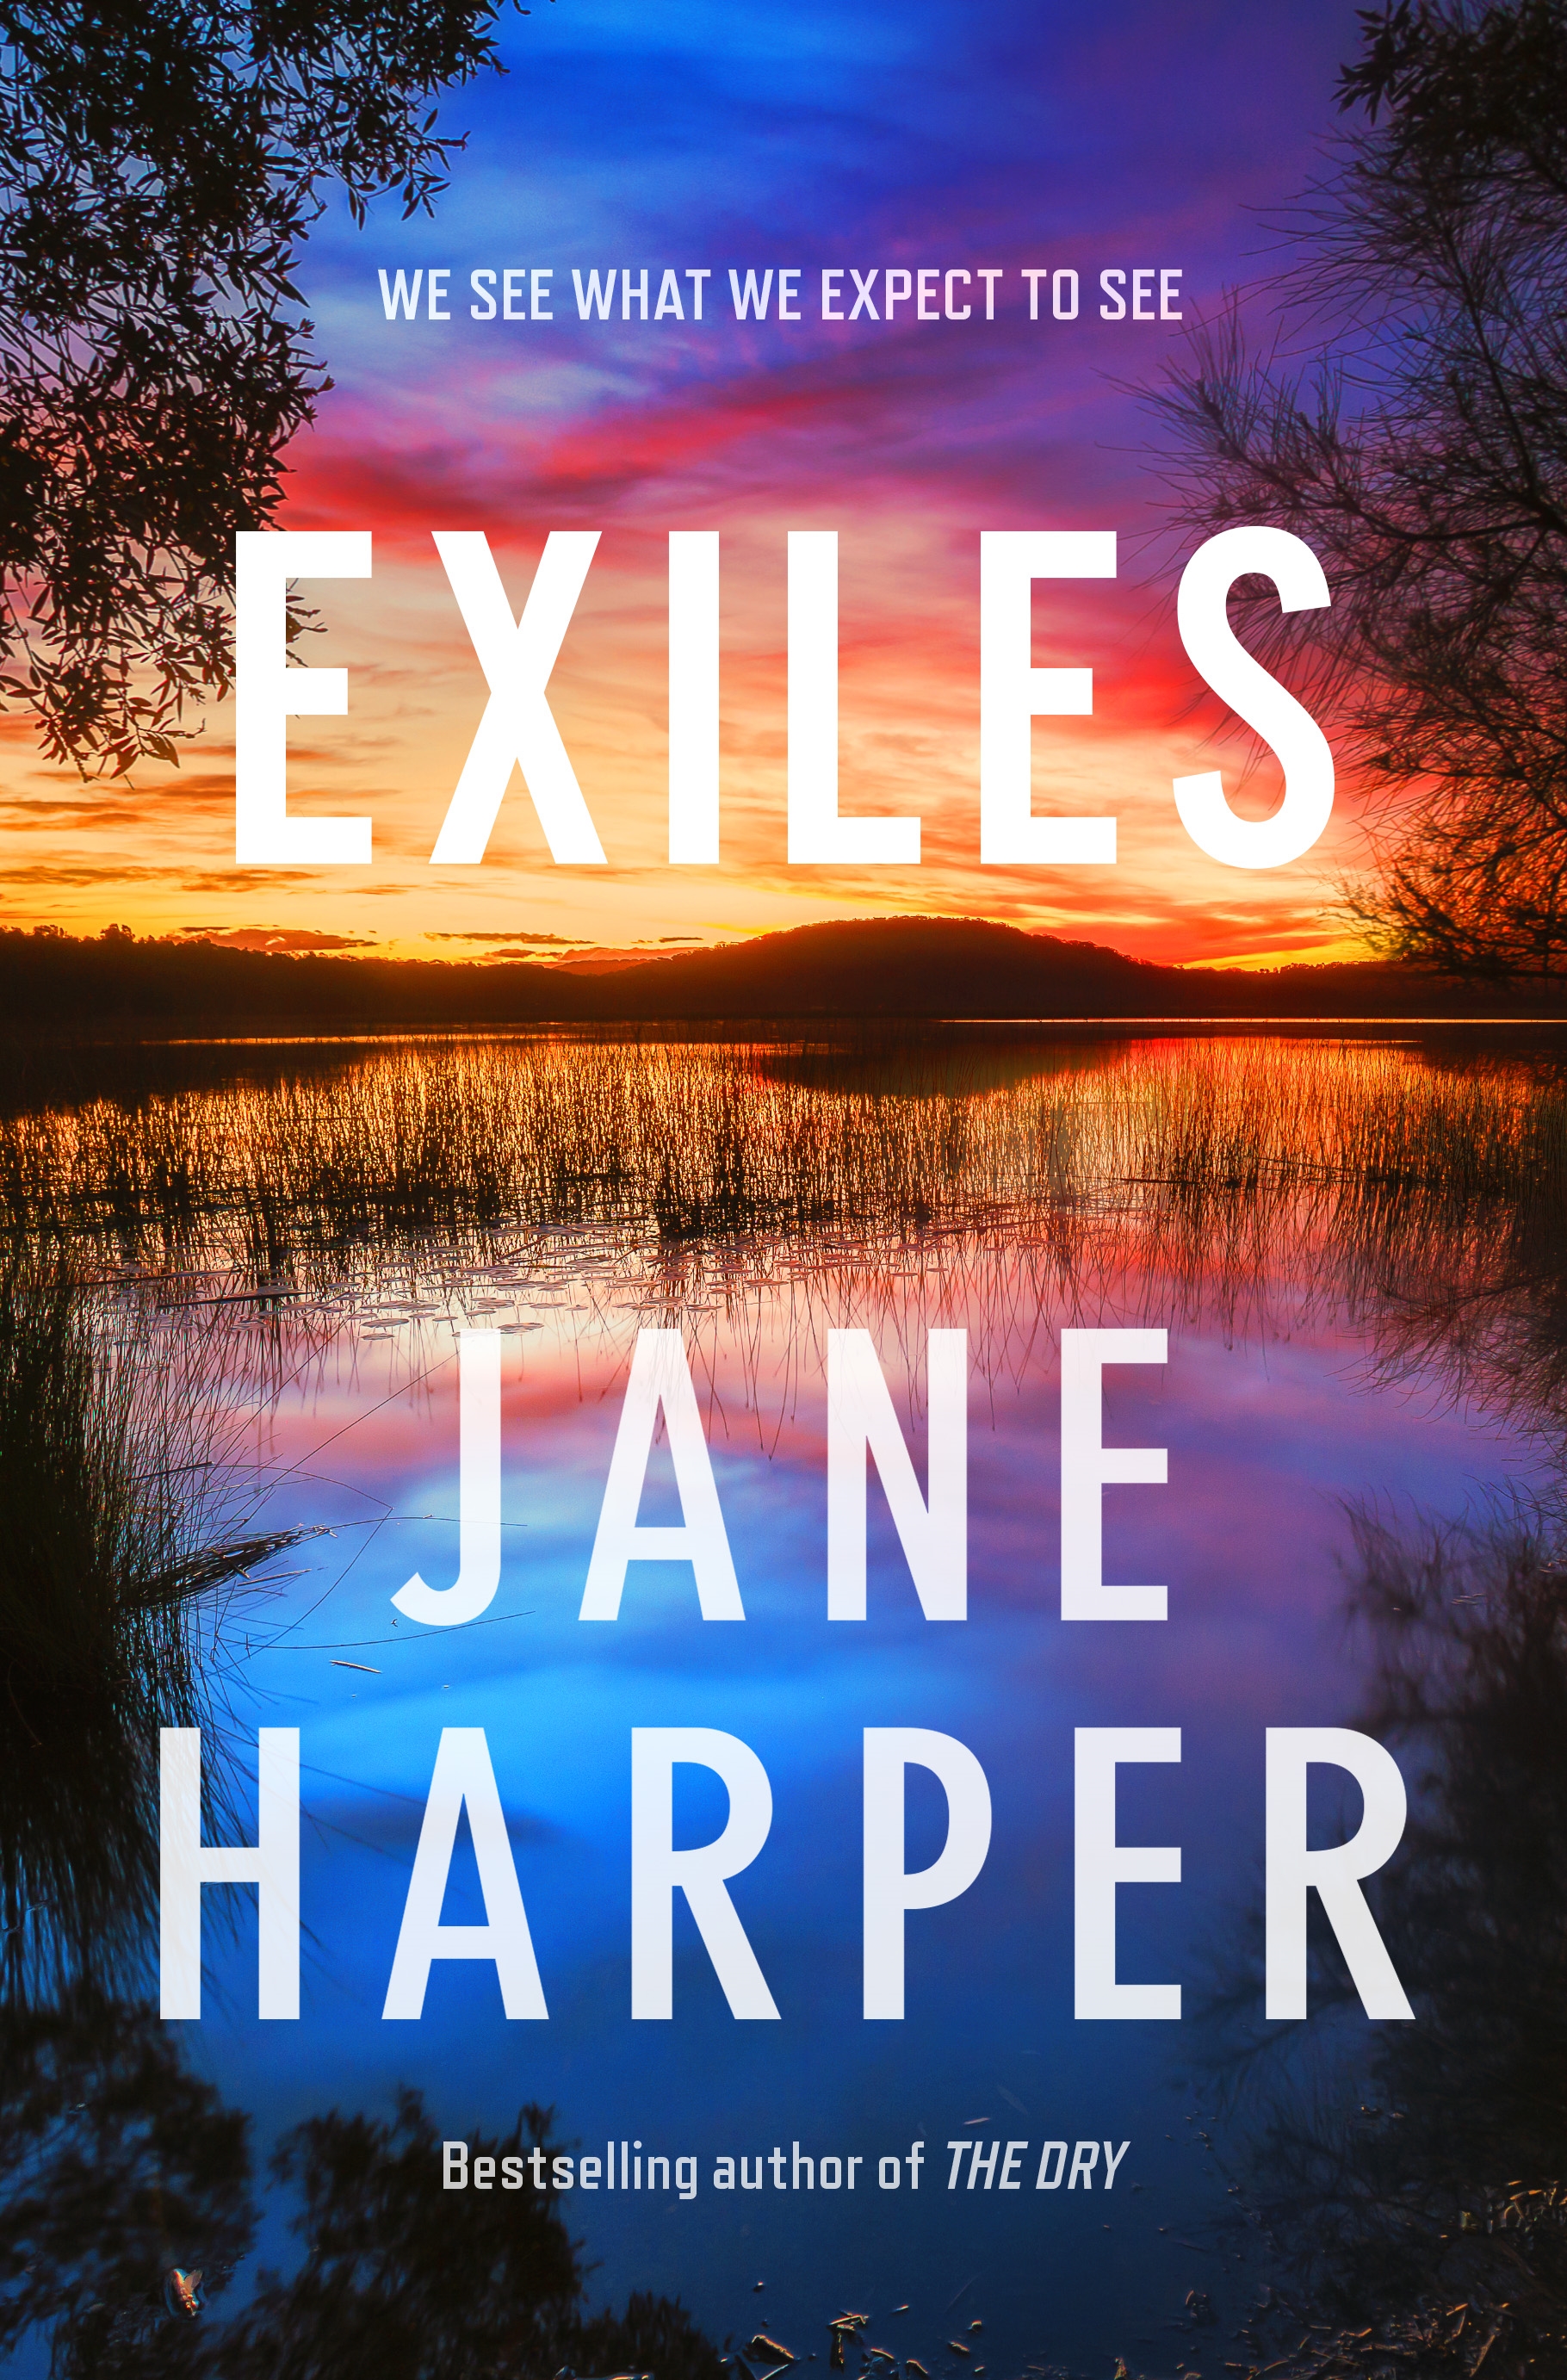 A book cover showing a lake at sunset, with vivid blue, yellow and pink sky reflected on the water